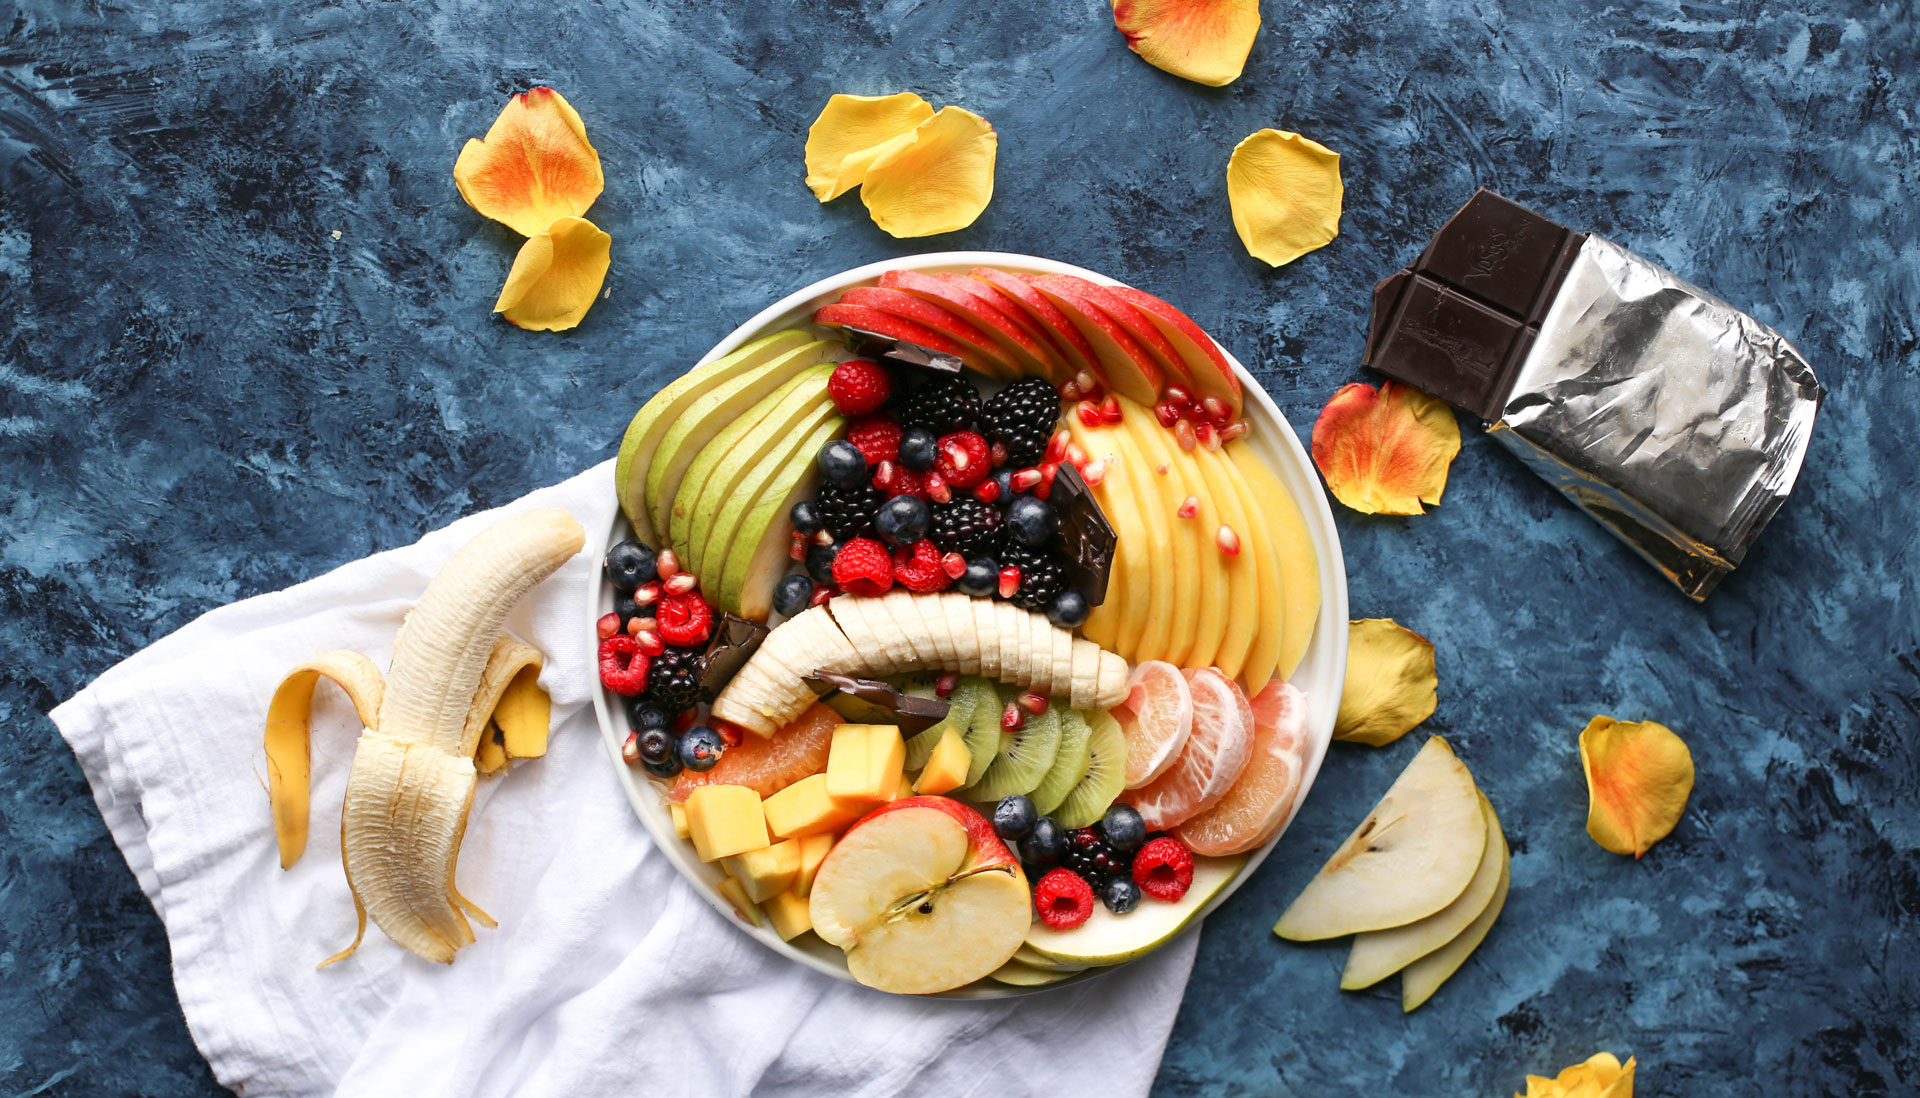 Healthy breakfast bowl of tropical fruit on a countertop next to an open dark chocolate bar